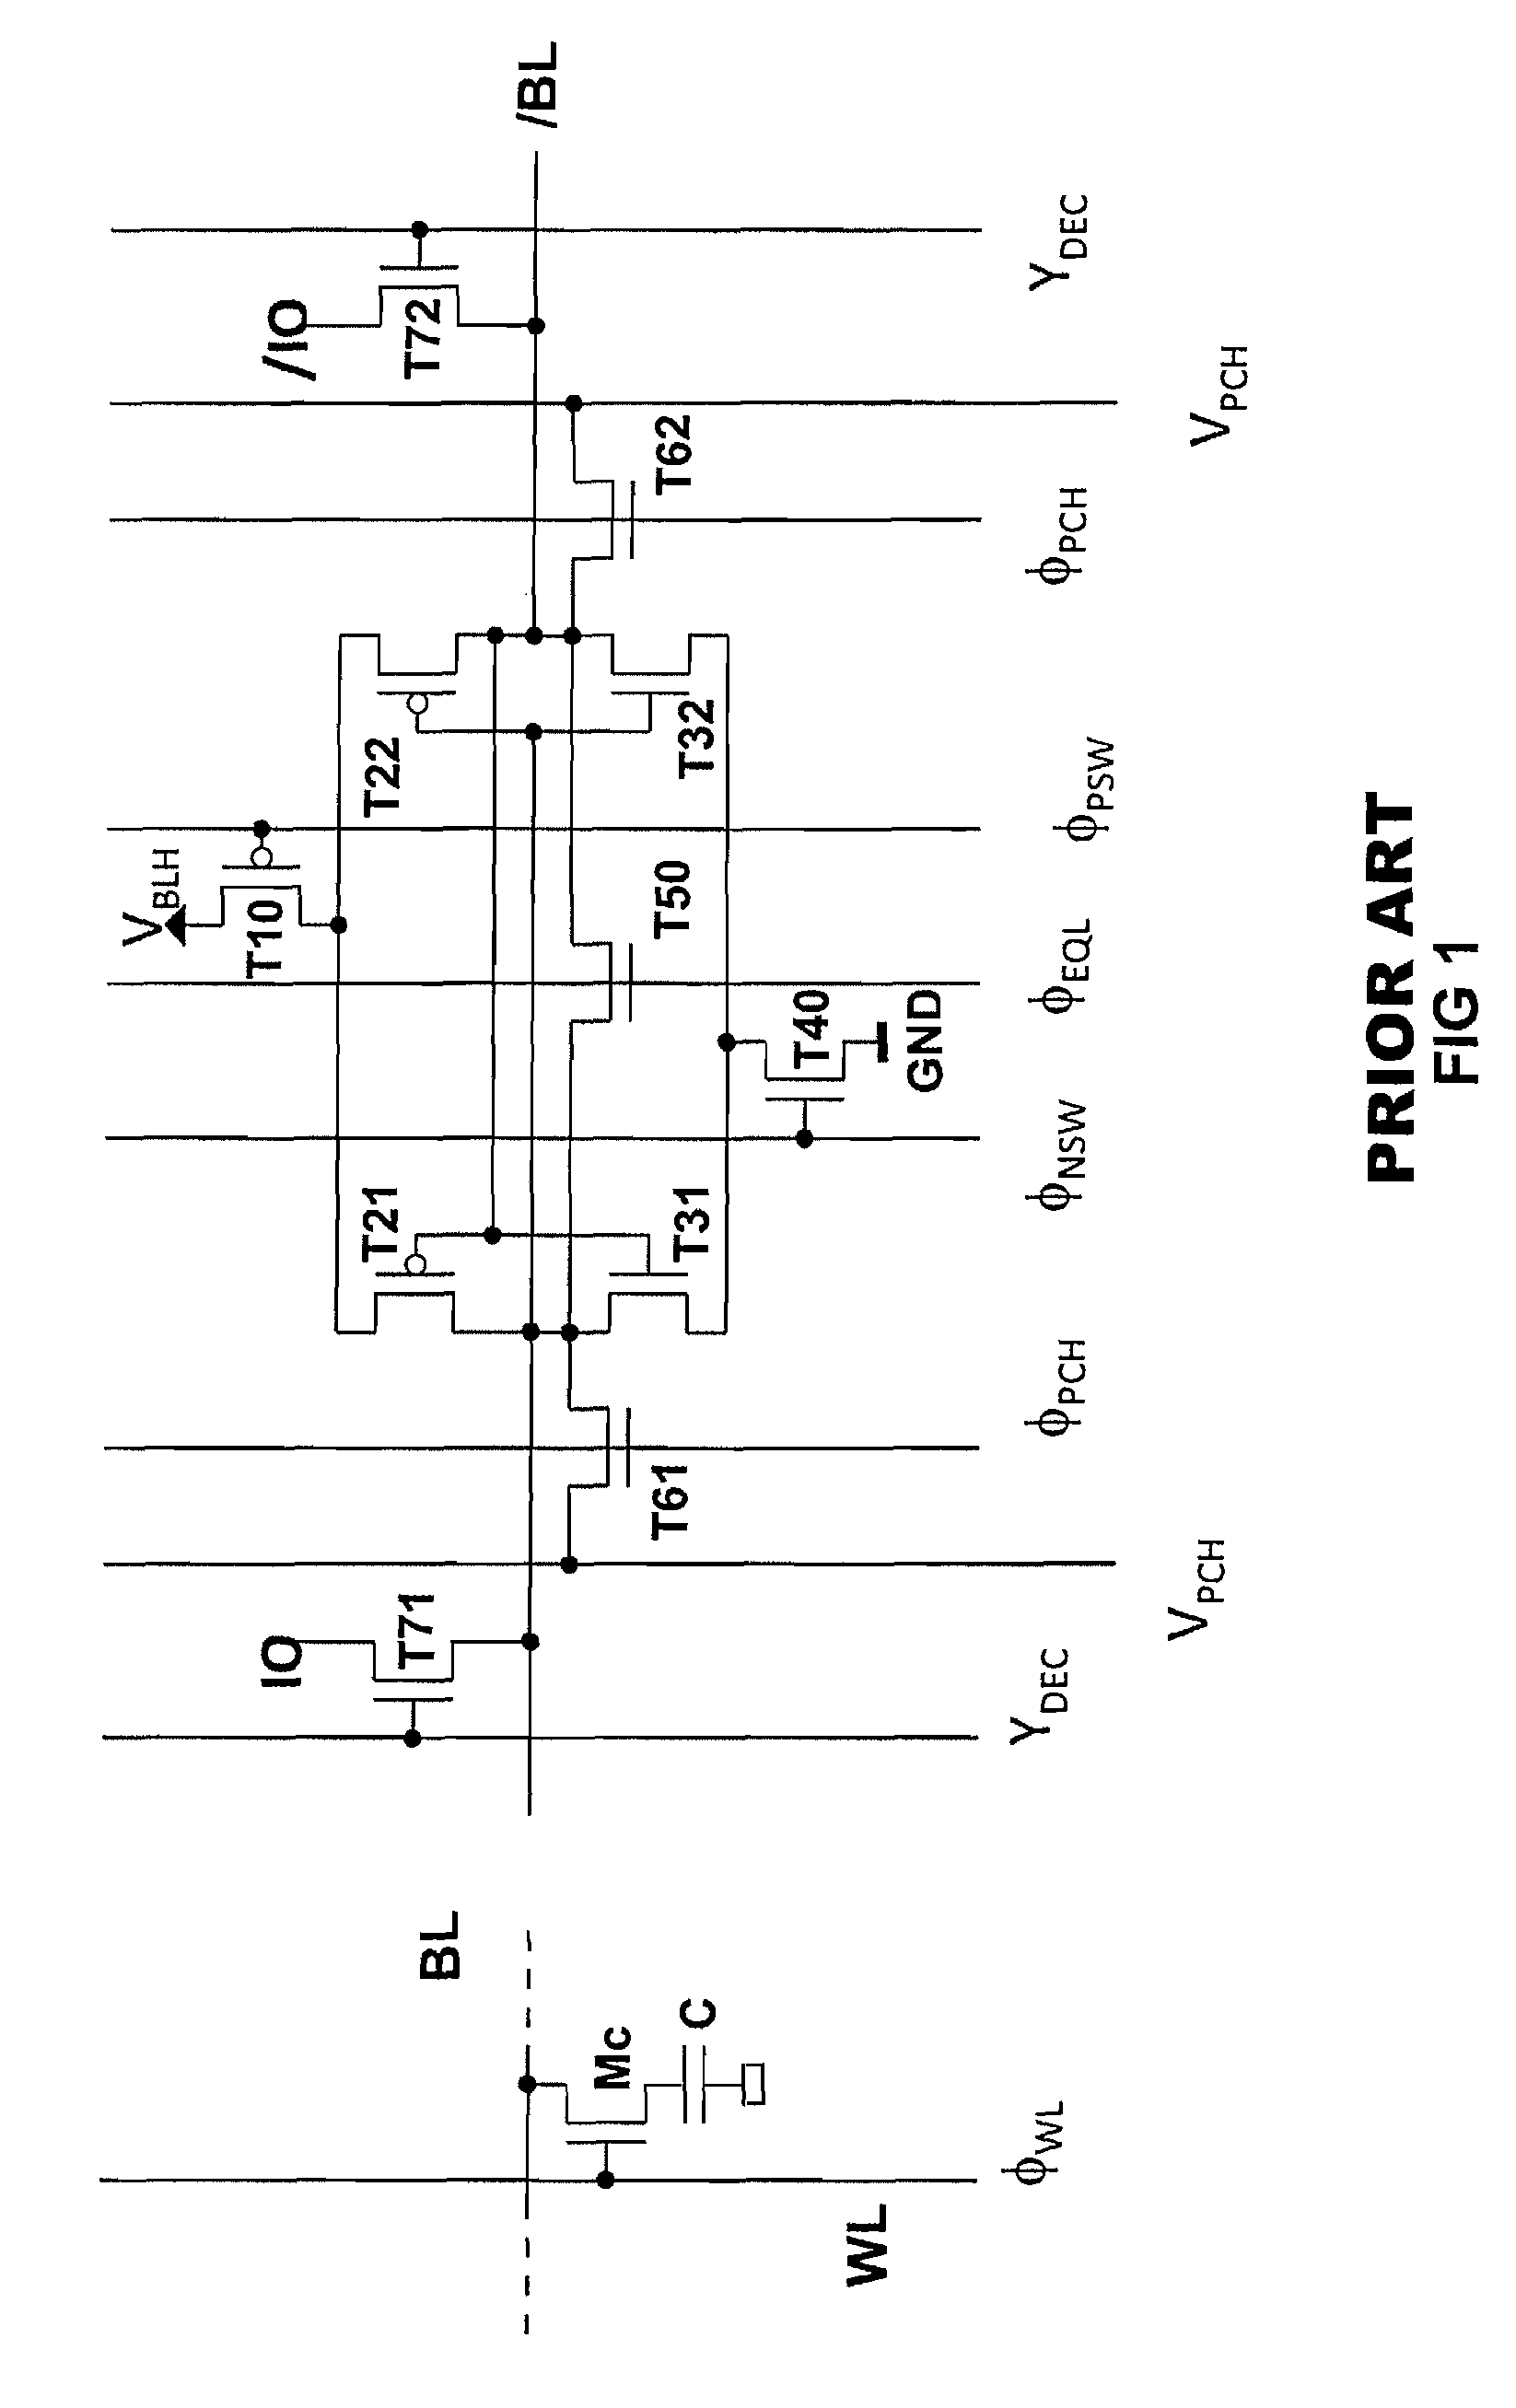 Differential sense amplifier without dedicated pass-gate transistors